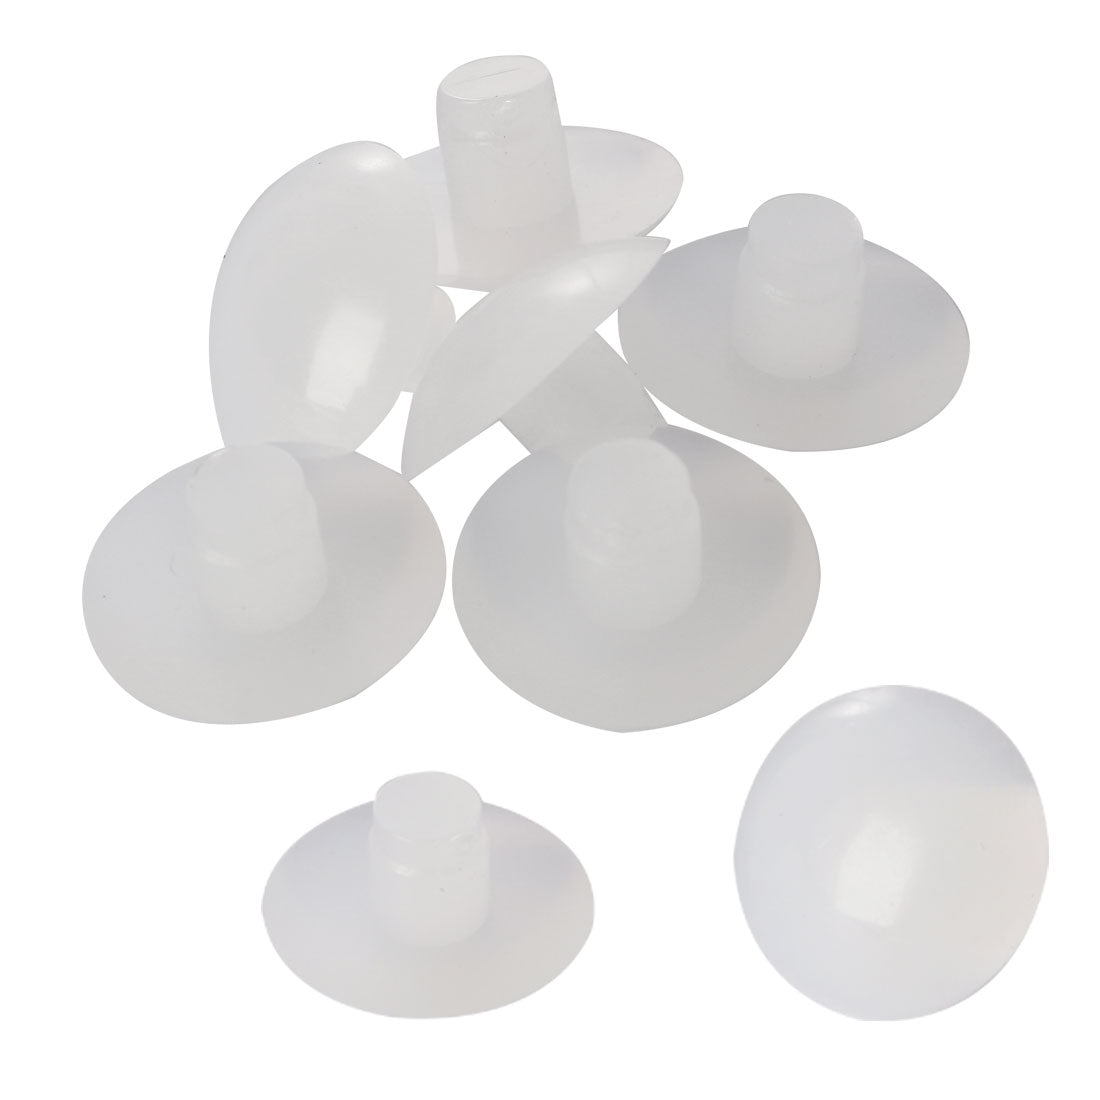 uxcell Uxcell 8pcs 6mm White Stem Bumpers Glide, Patio Outdoor Furniture Glass Table Top Anti-collision Embedded